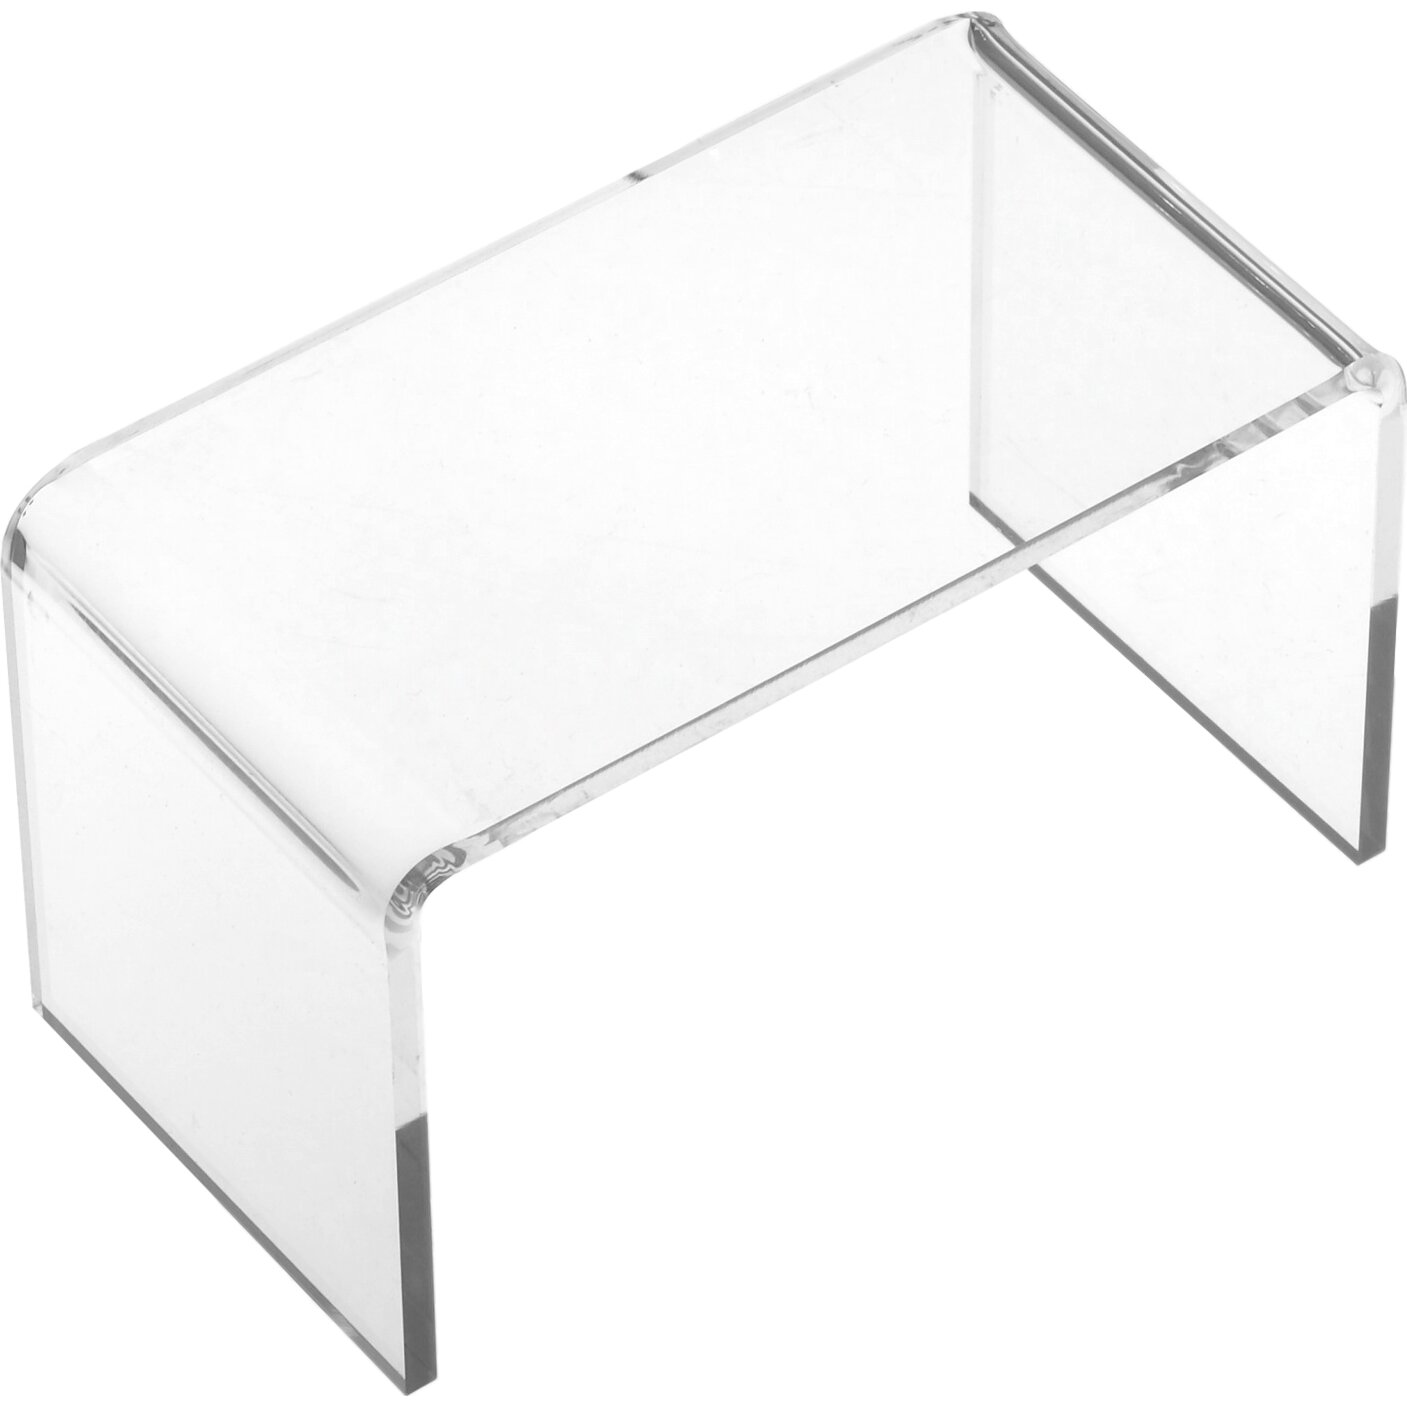 9 Clear Acrylic Risers Jewelry Display Stands